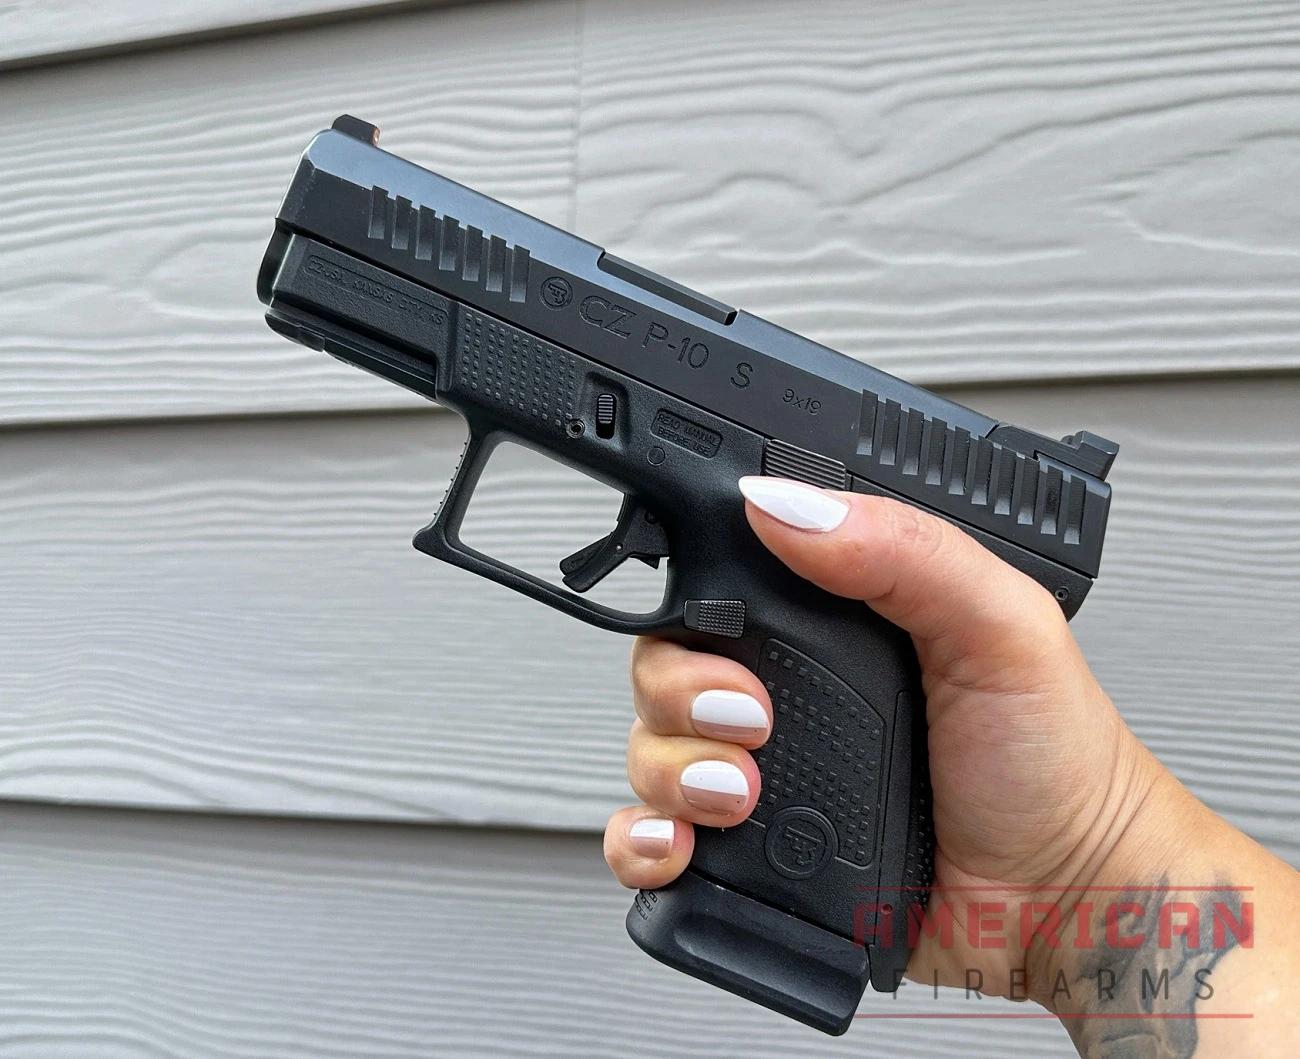 The CZ P10-S in hand.